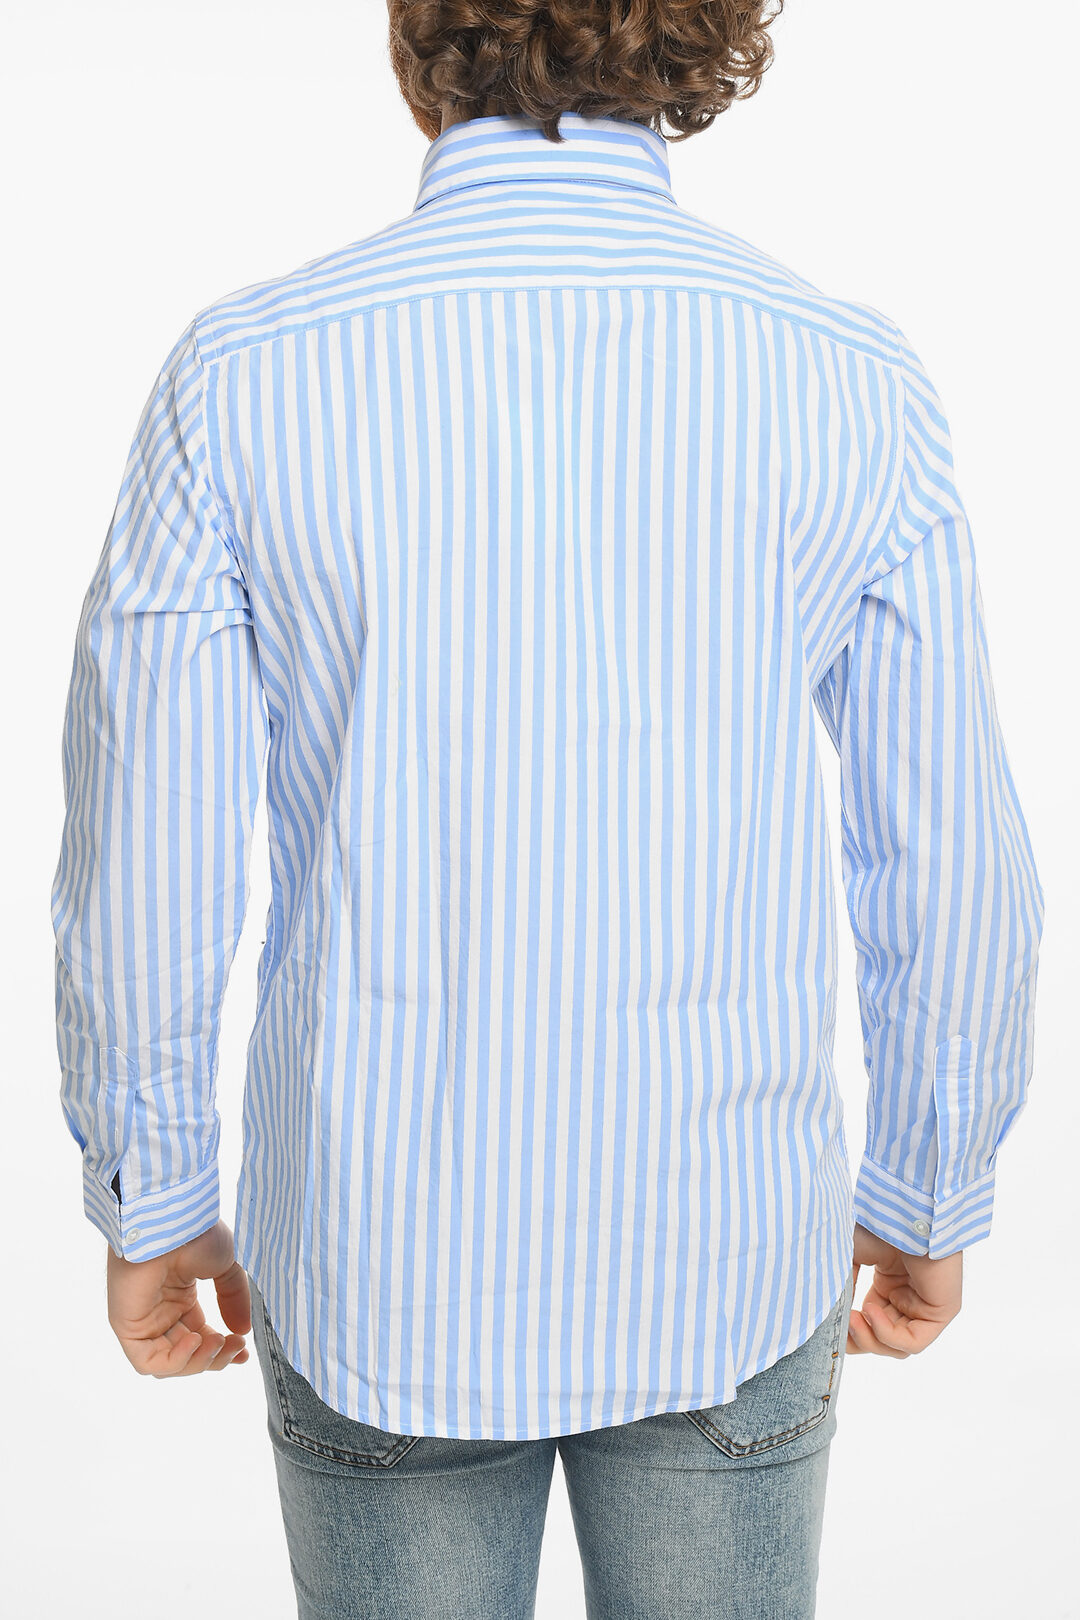 Harmony Awning Striped Button-Down Collar Shirt with Breast Pocket men ...